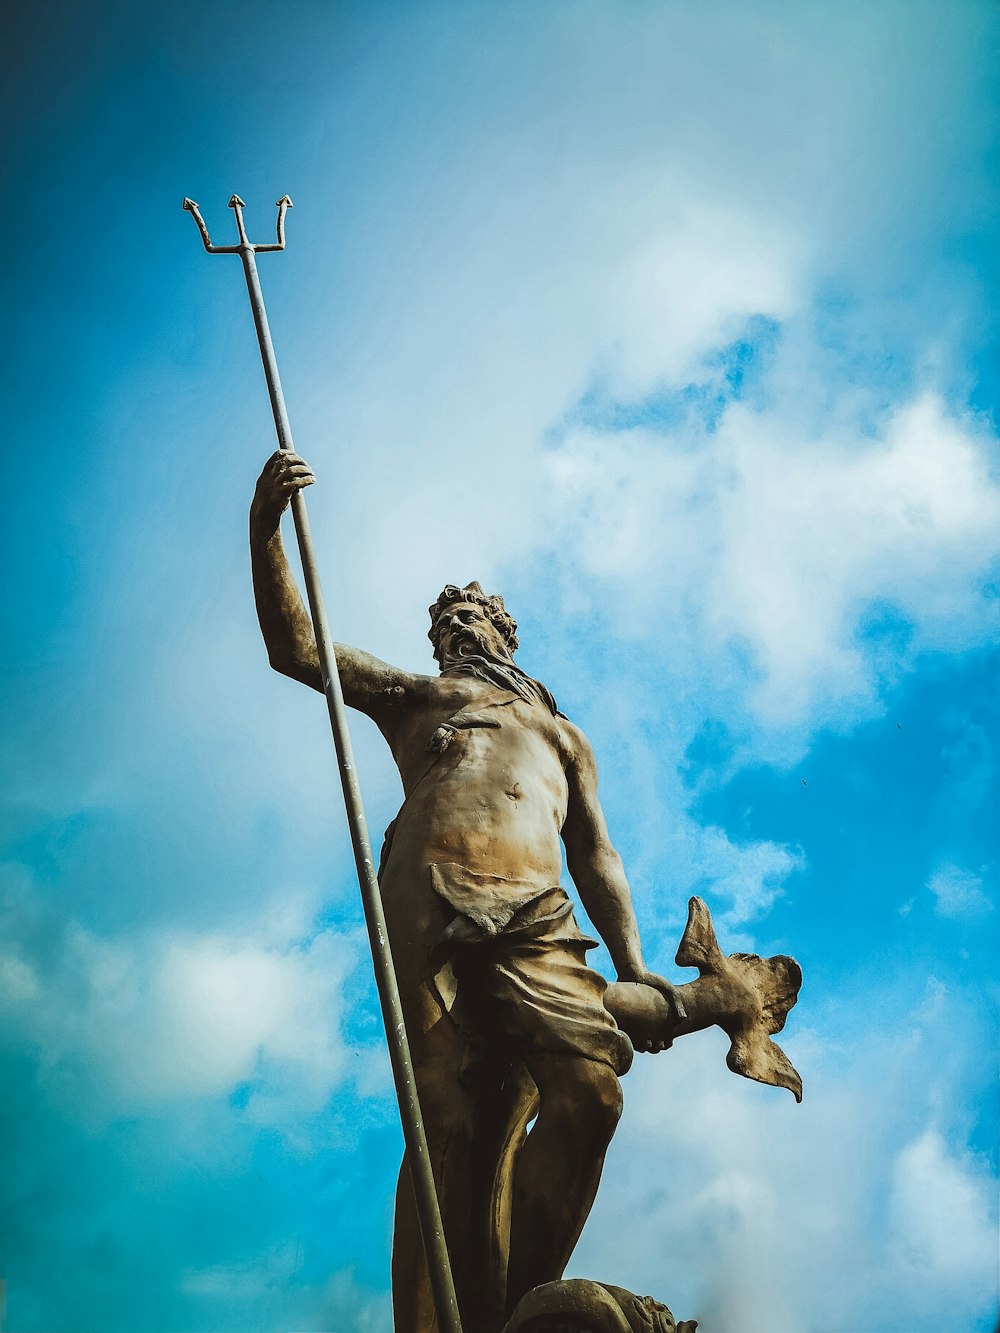 man holding trident statue under white clouds at daytime